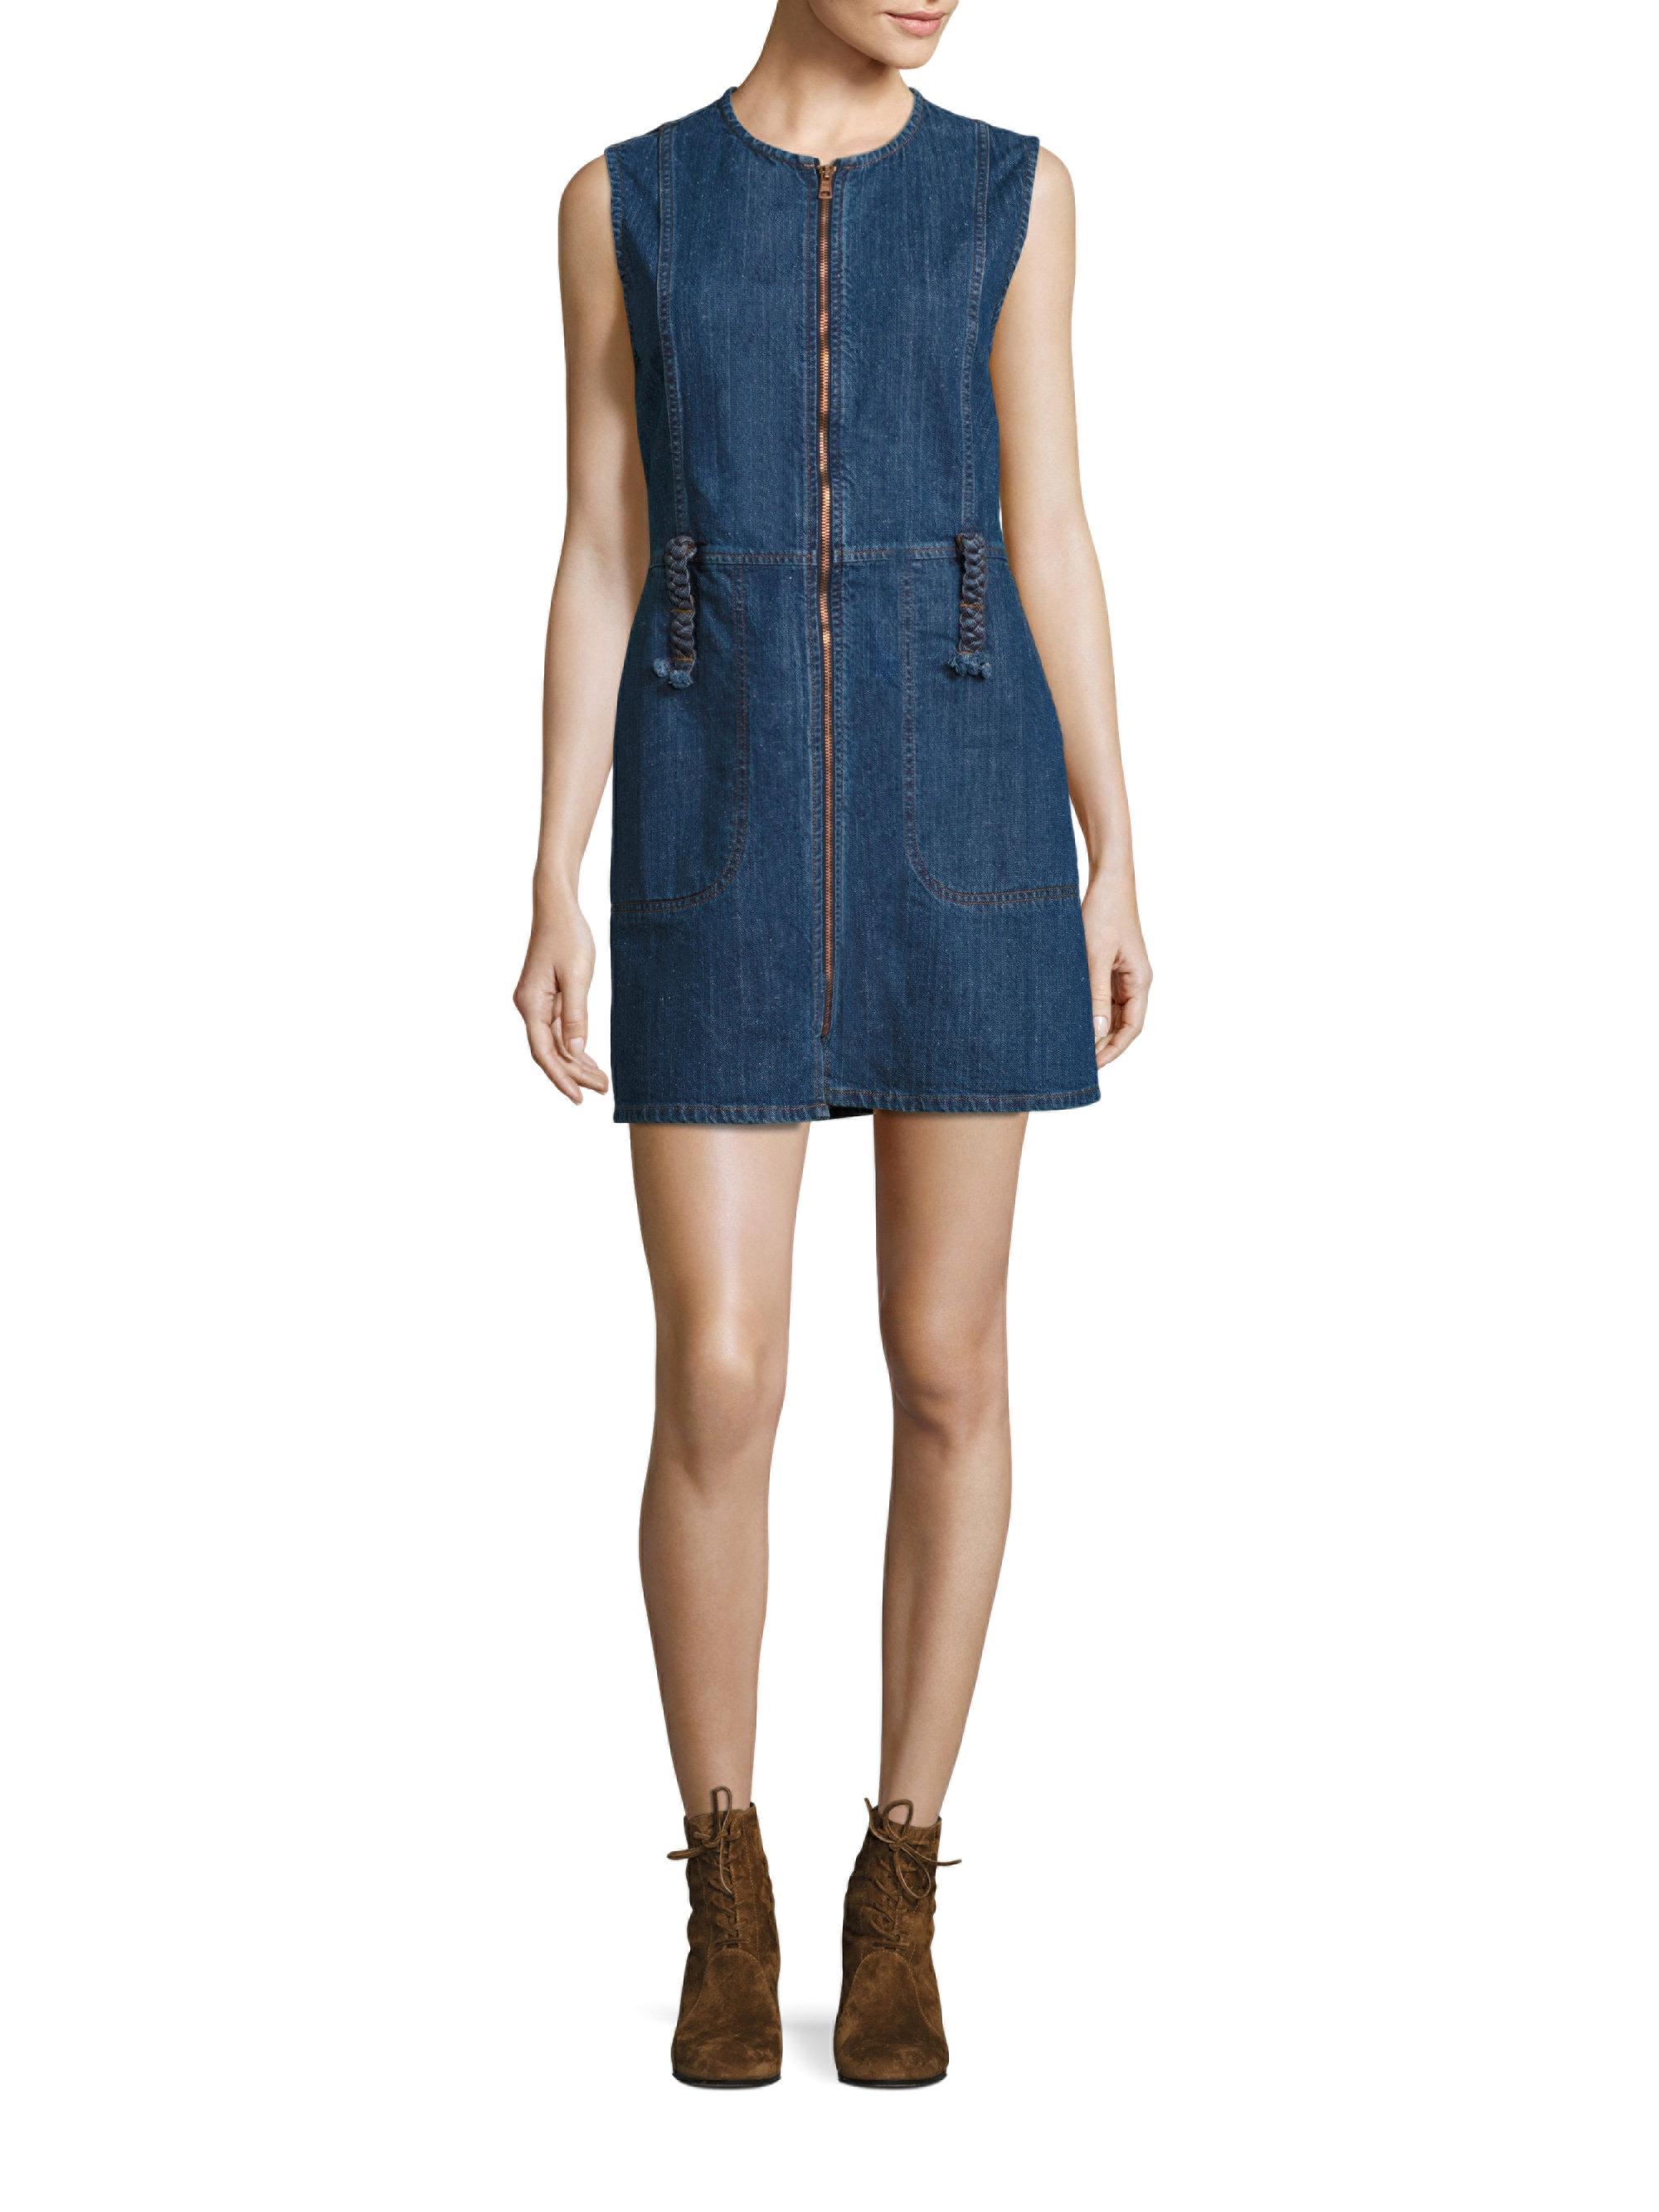 See By Chloé Zip-front Denim Dress in Washed Indigo (Blue) | Lyst